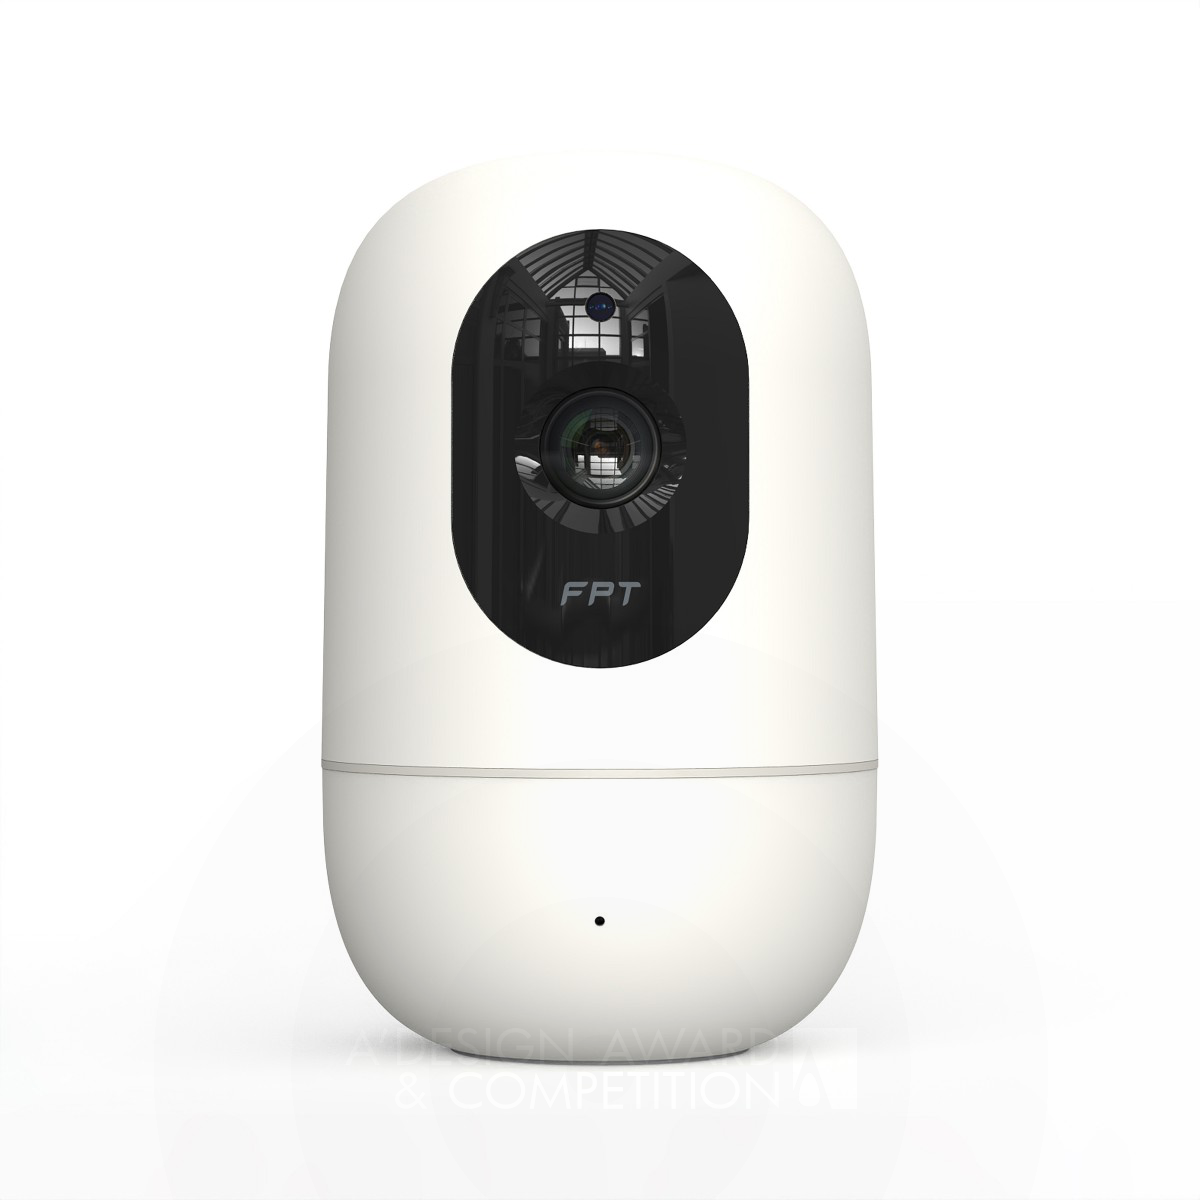 FPT Camera Play <b>Home Security